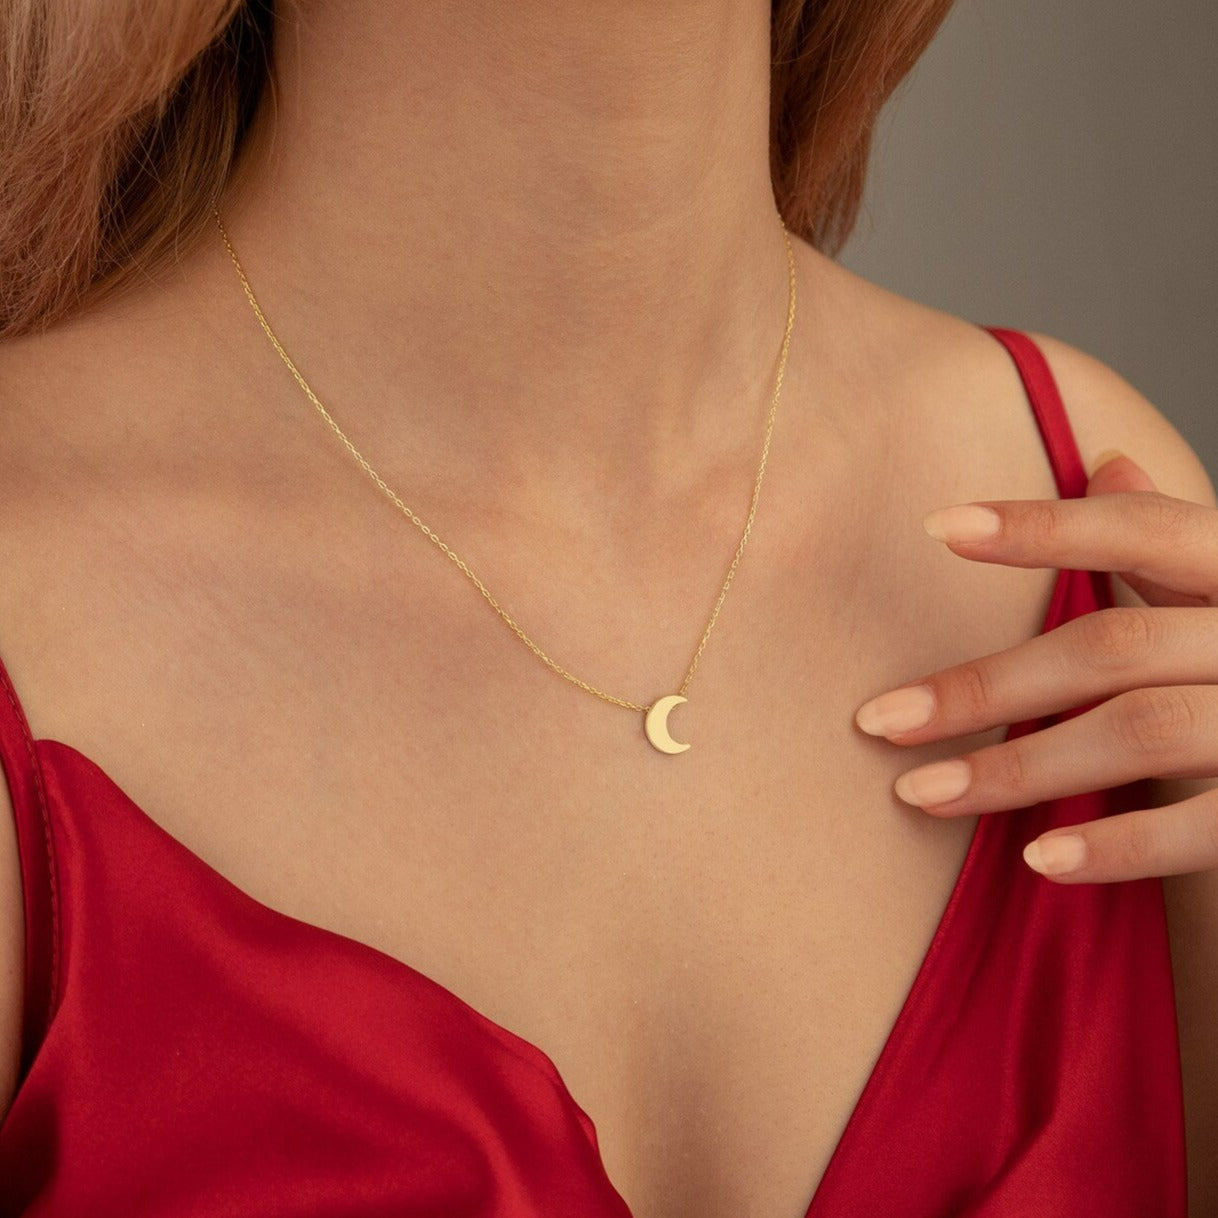 18 Carat Gold Crescent Shaped Necklace - Burst of Arabia - Illuminate Your Style with Exquisite Arabic Jewelry.